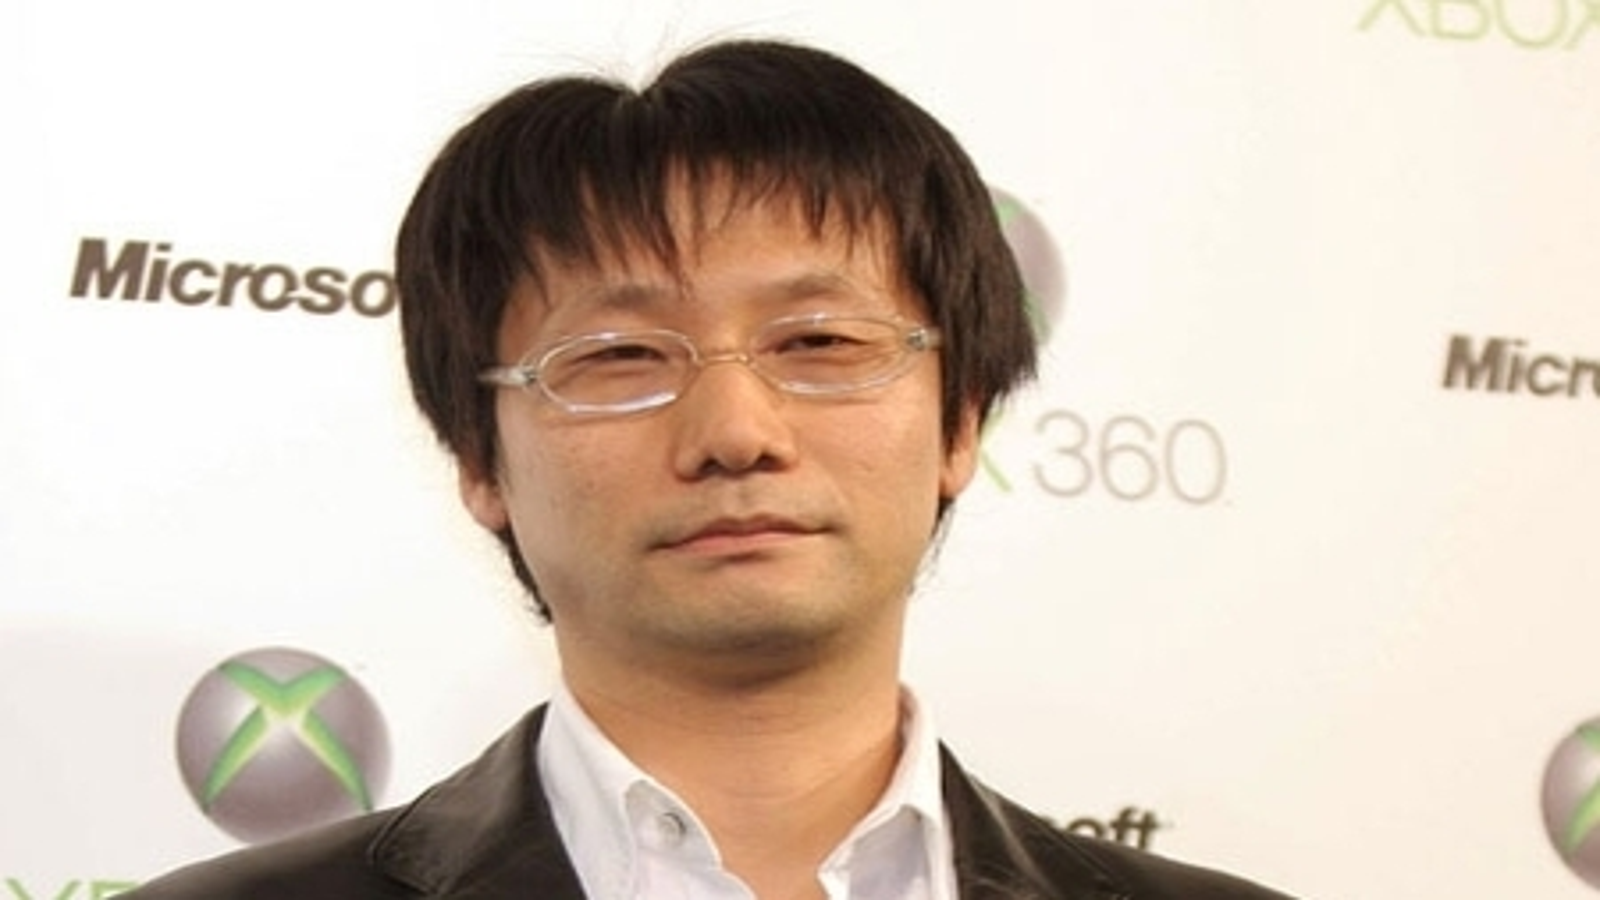 Hideo Kojima Has A Part In Control (And We Should've Known)